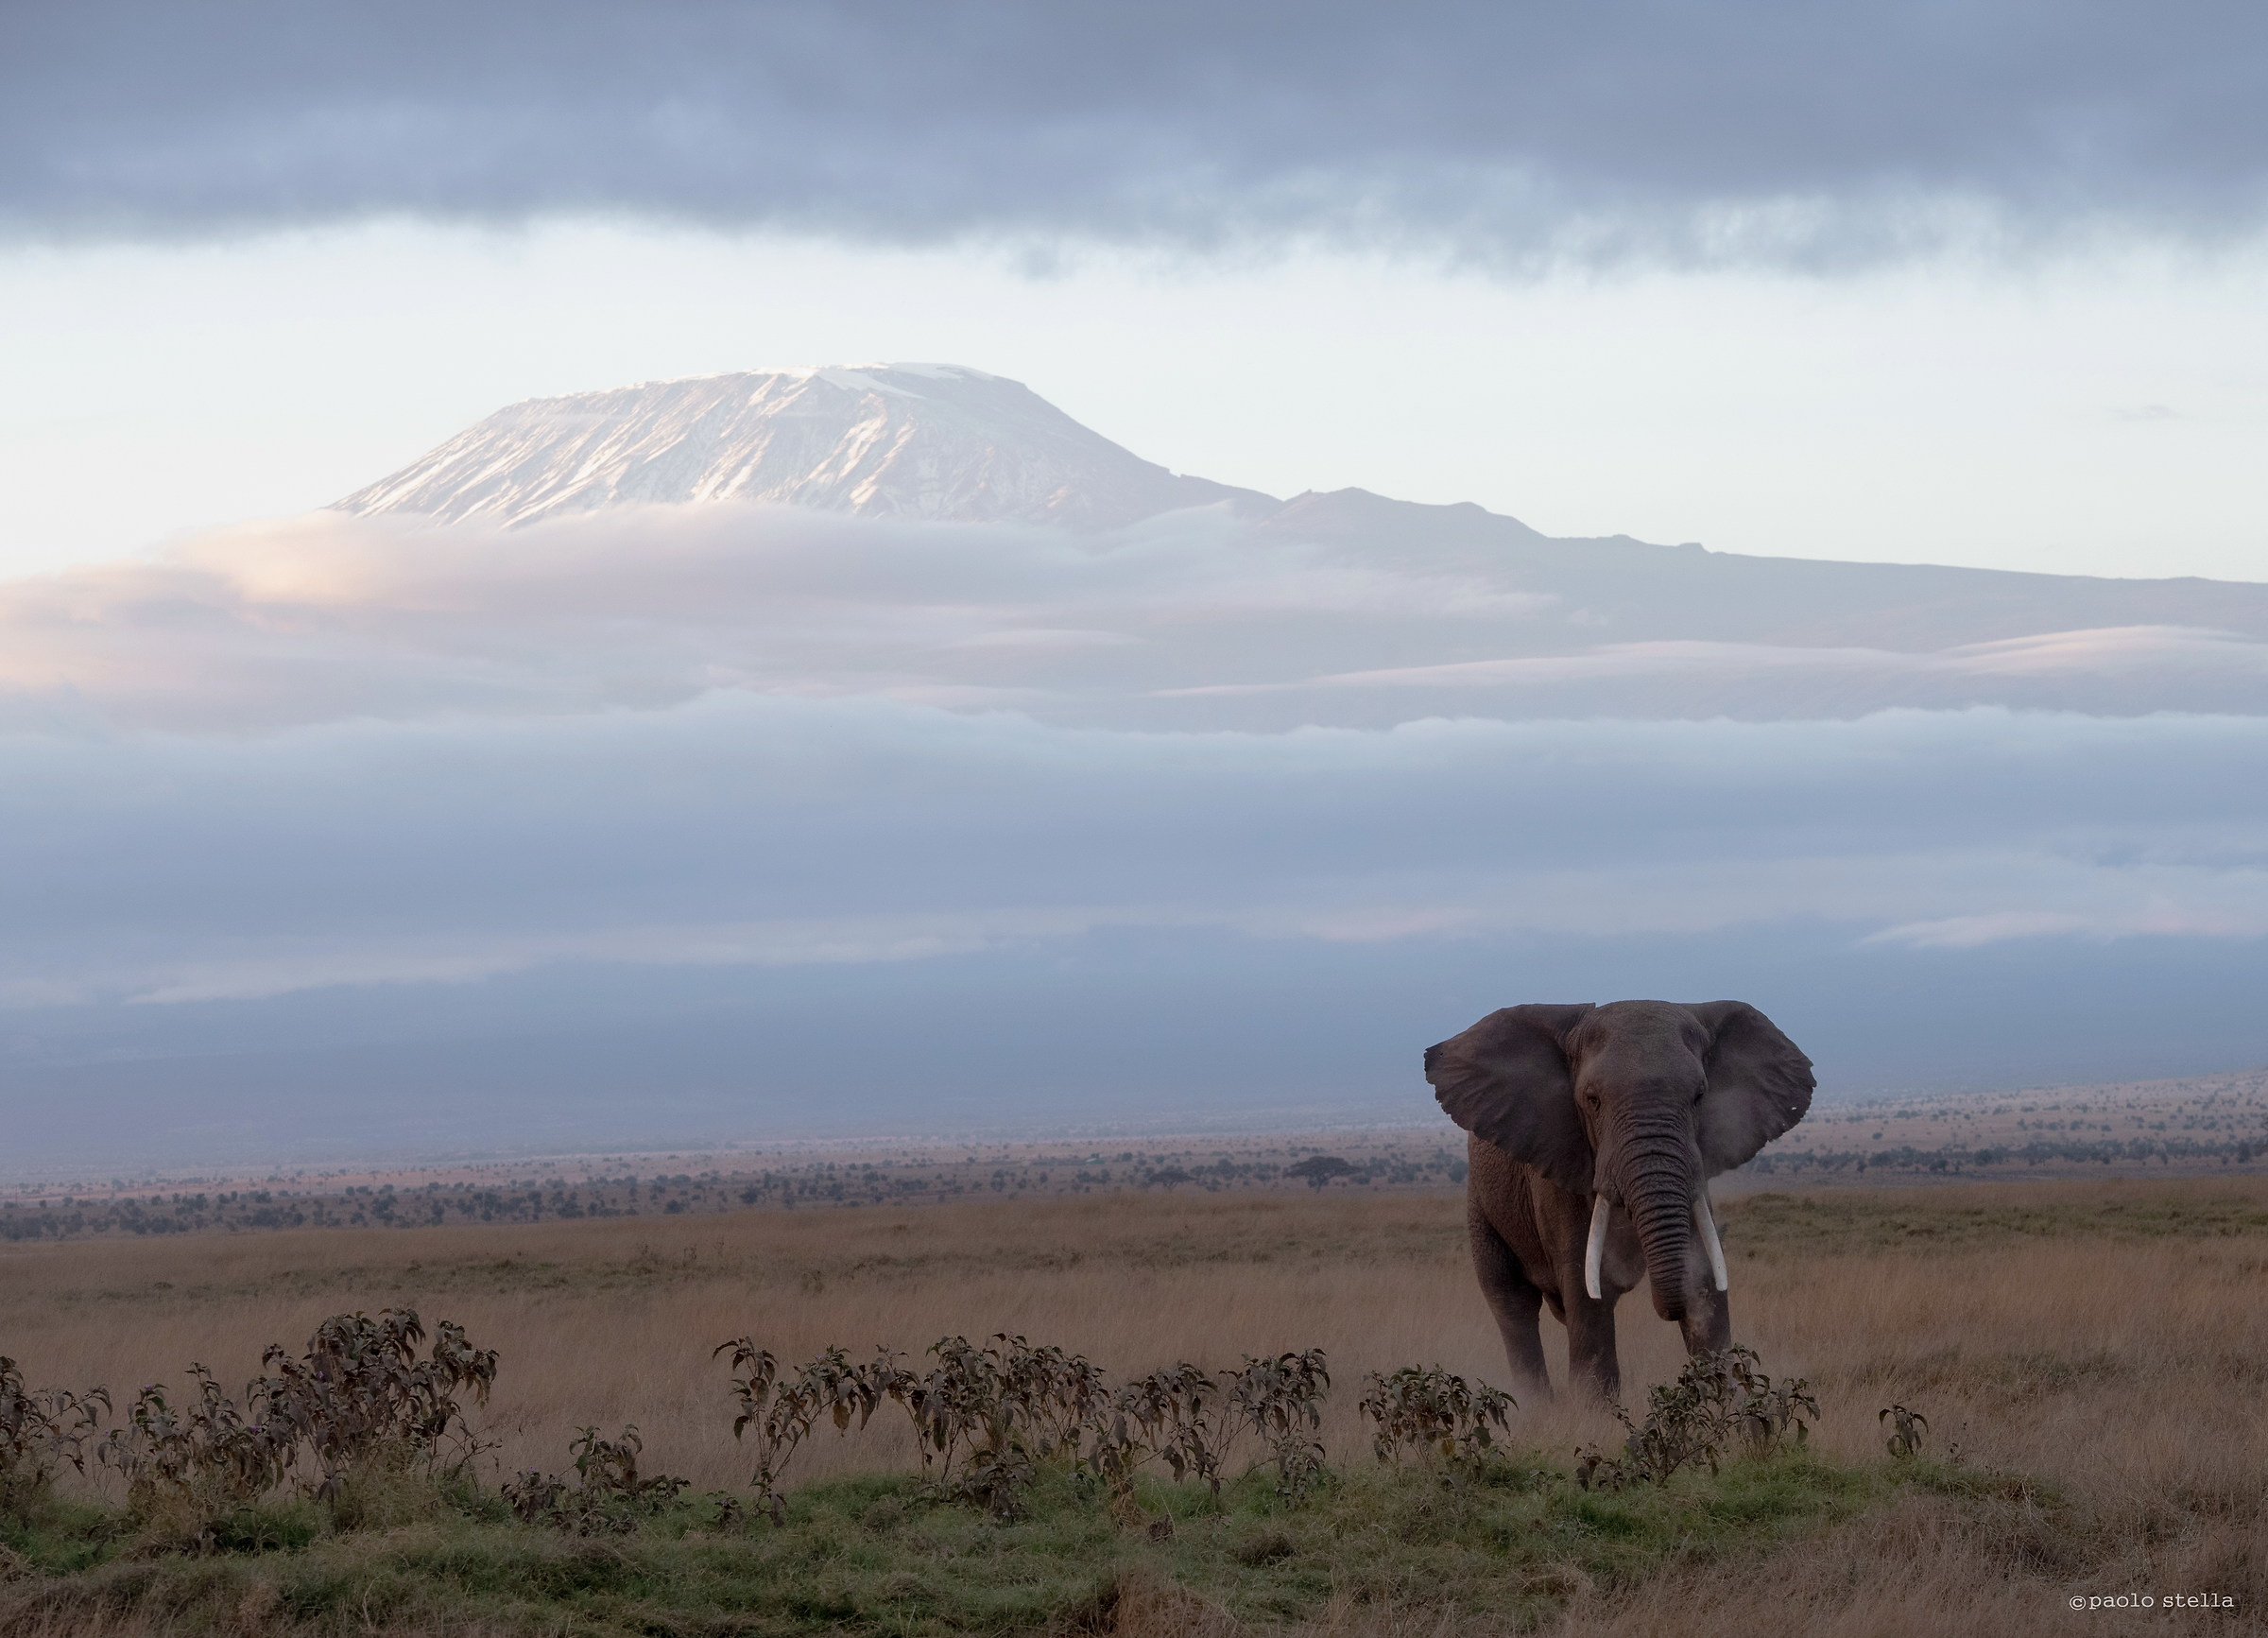 The Elephant and the volcano...